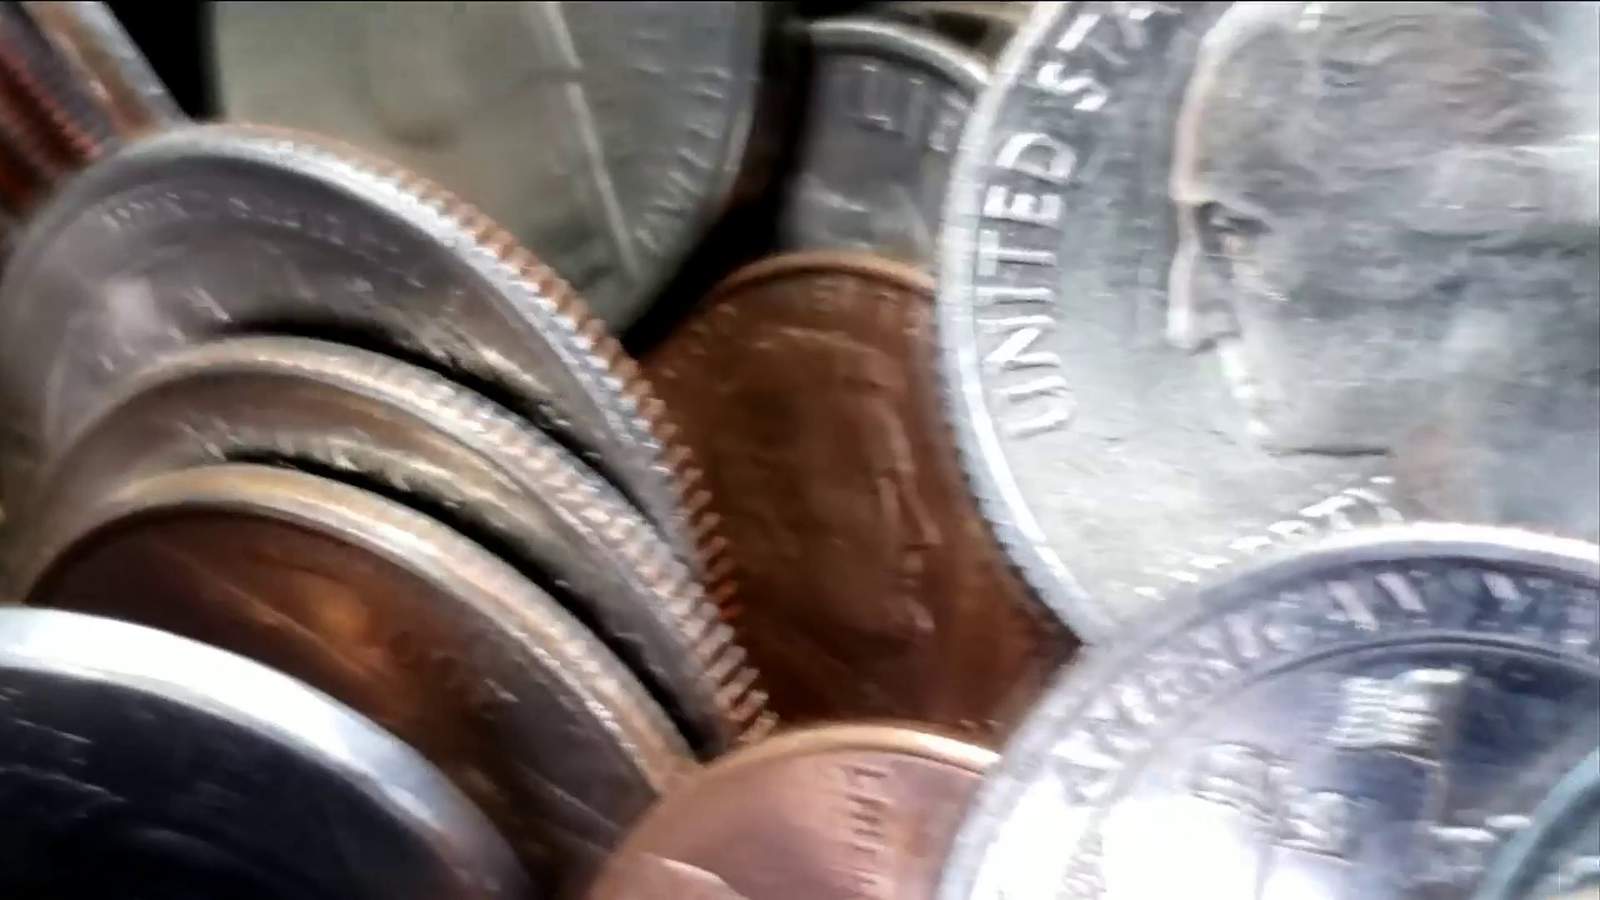 Coin shortage hits retailers, laundromats, tooth fairy